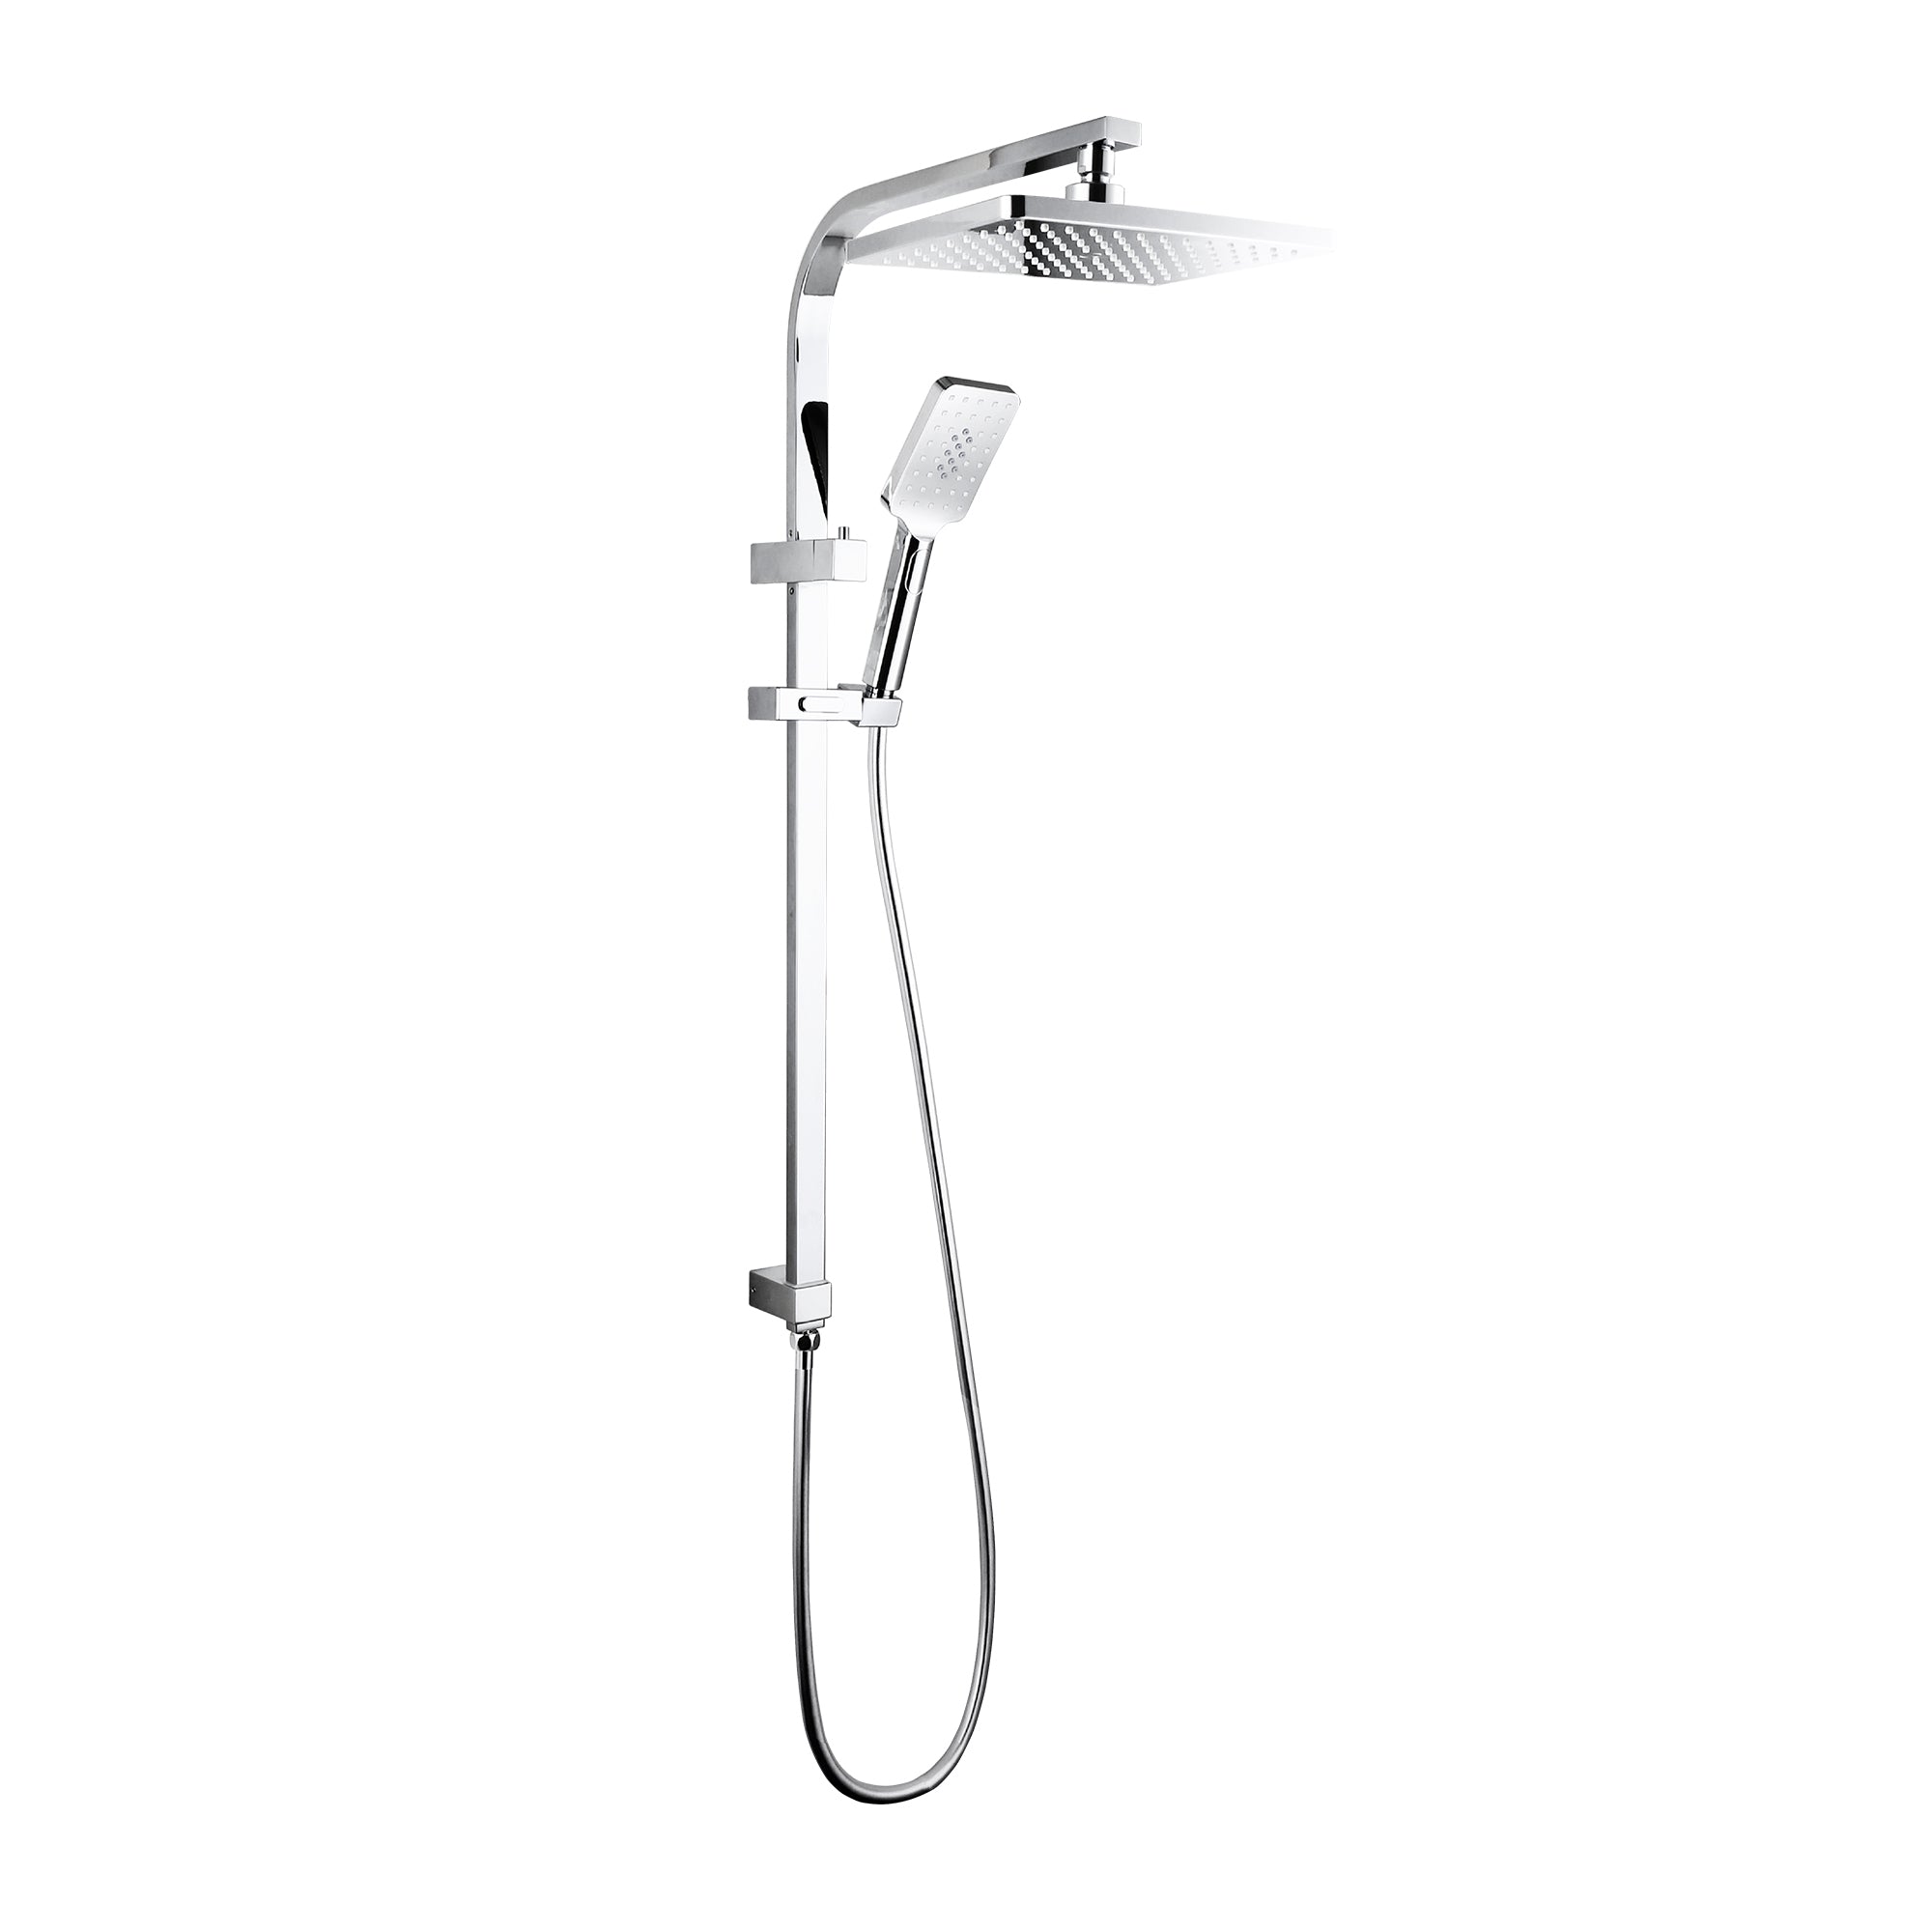 LINKWARE LIBERTY TWIN SHOWER WITH RAIL SYSTEM CHROME